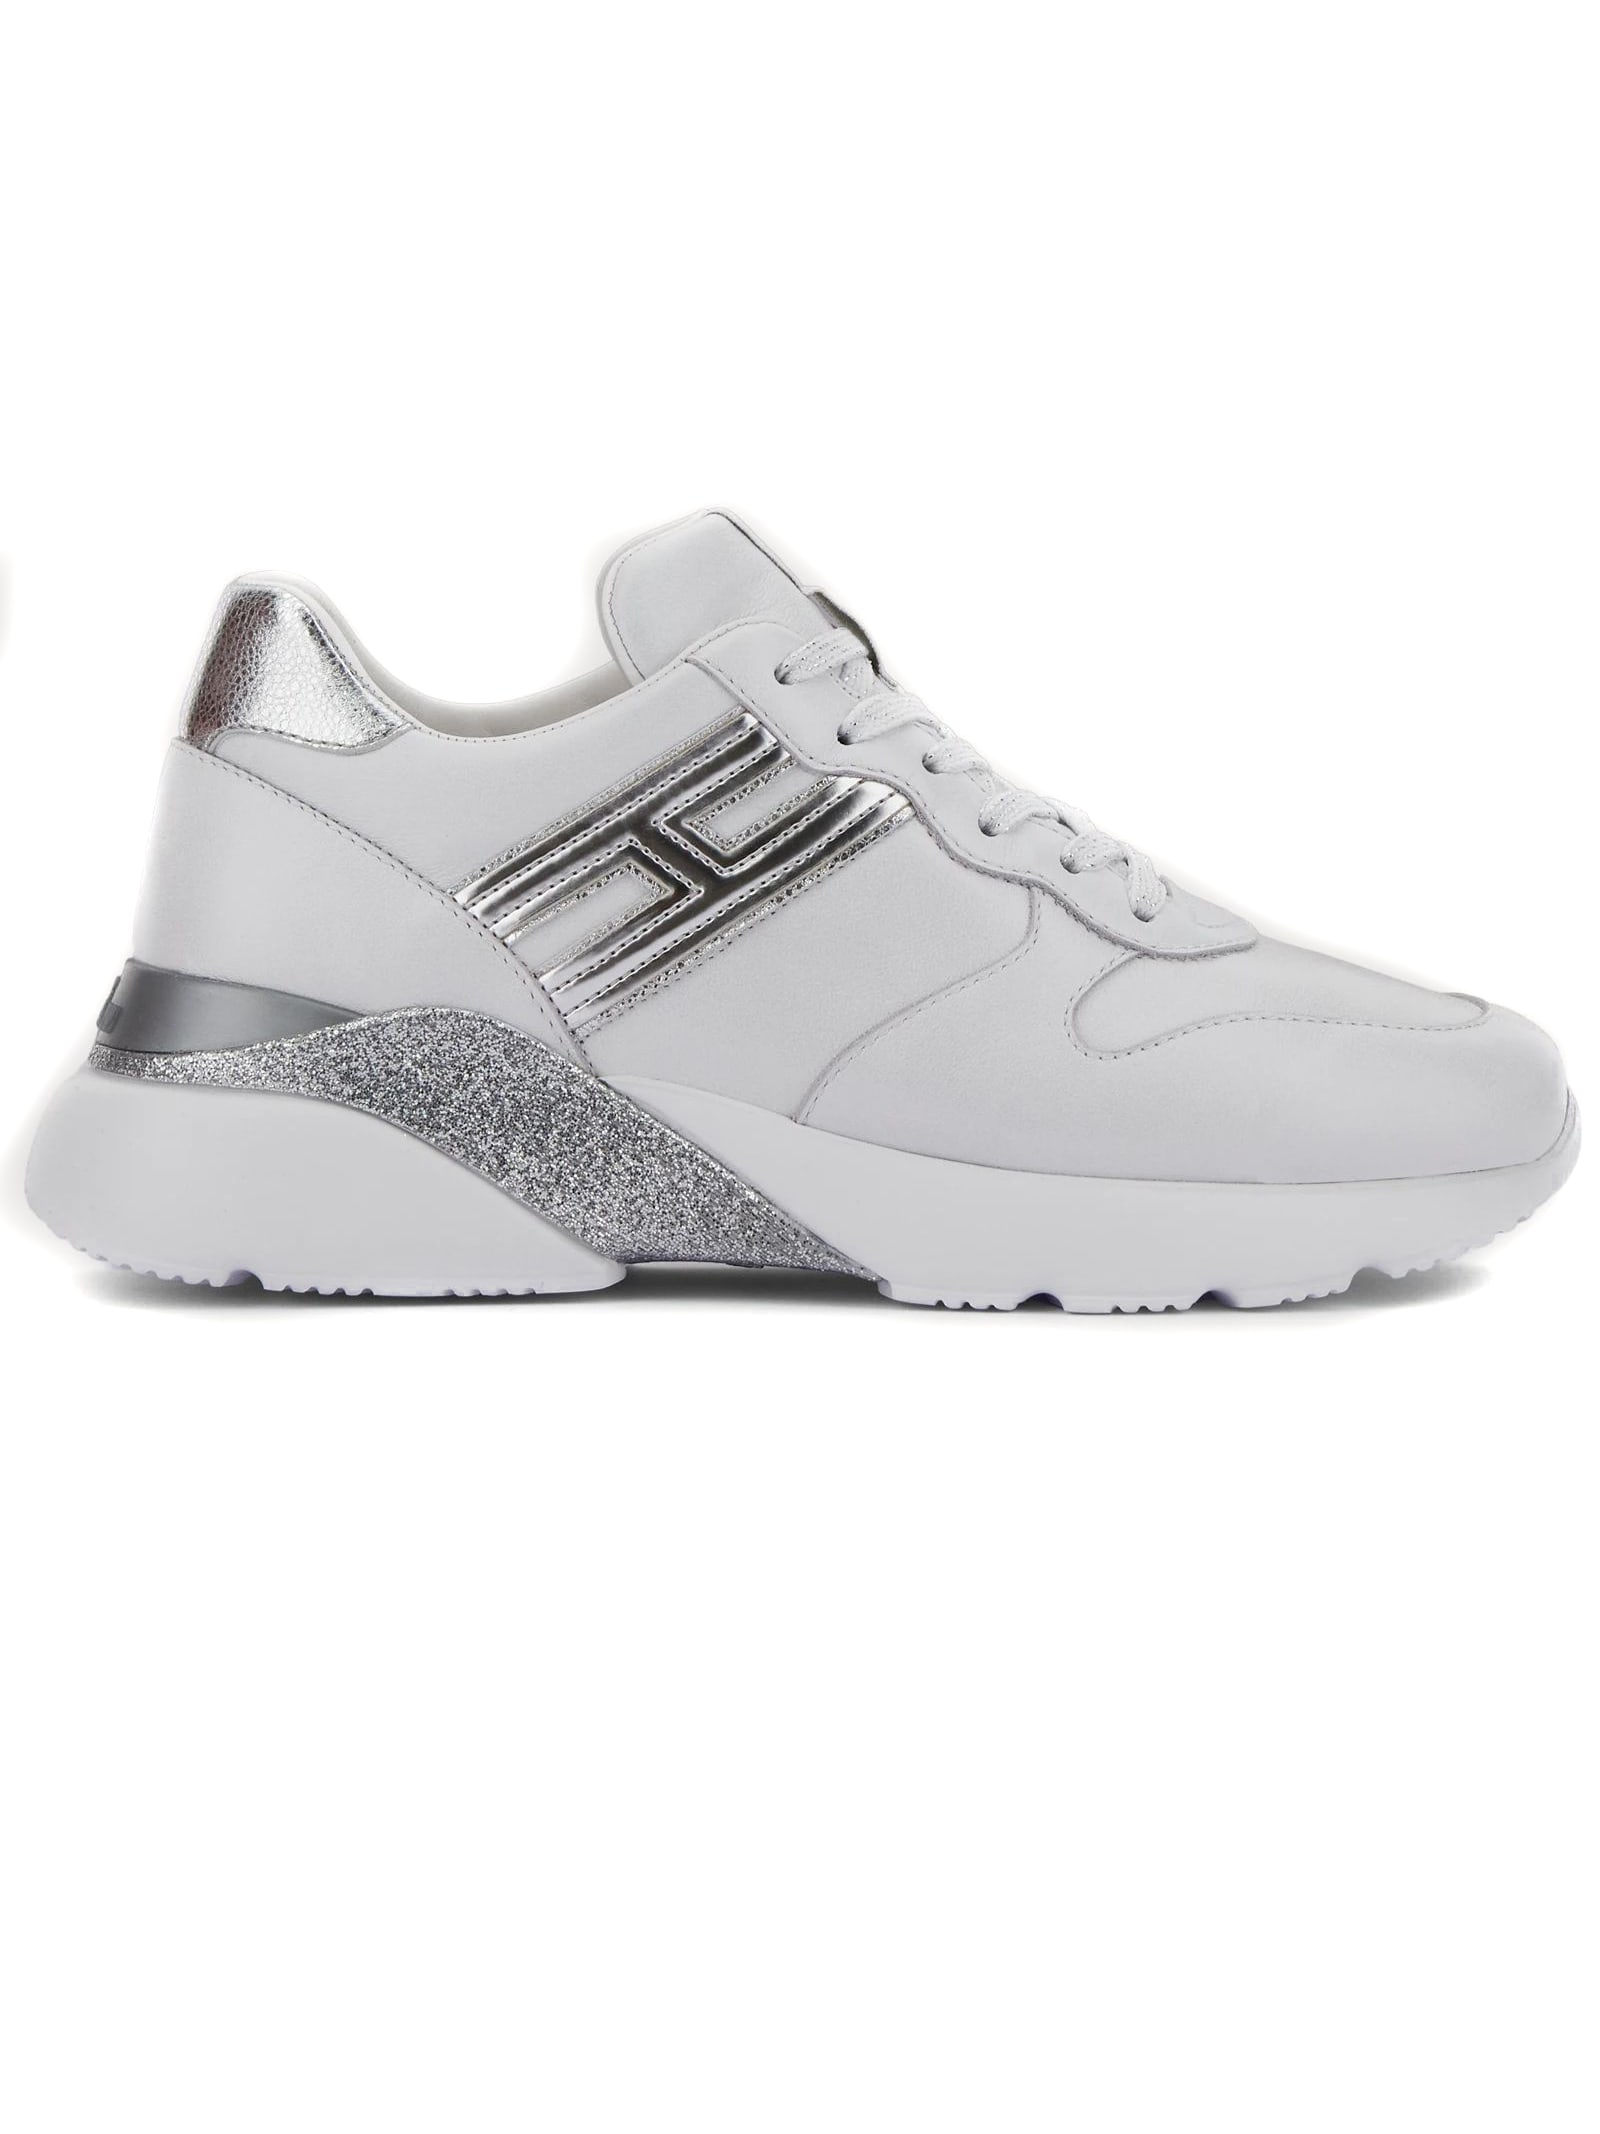 Hogan Sneakers Active One Silver, White